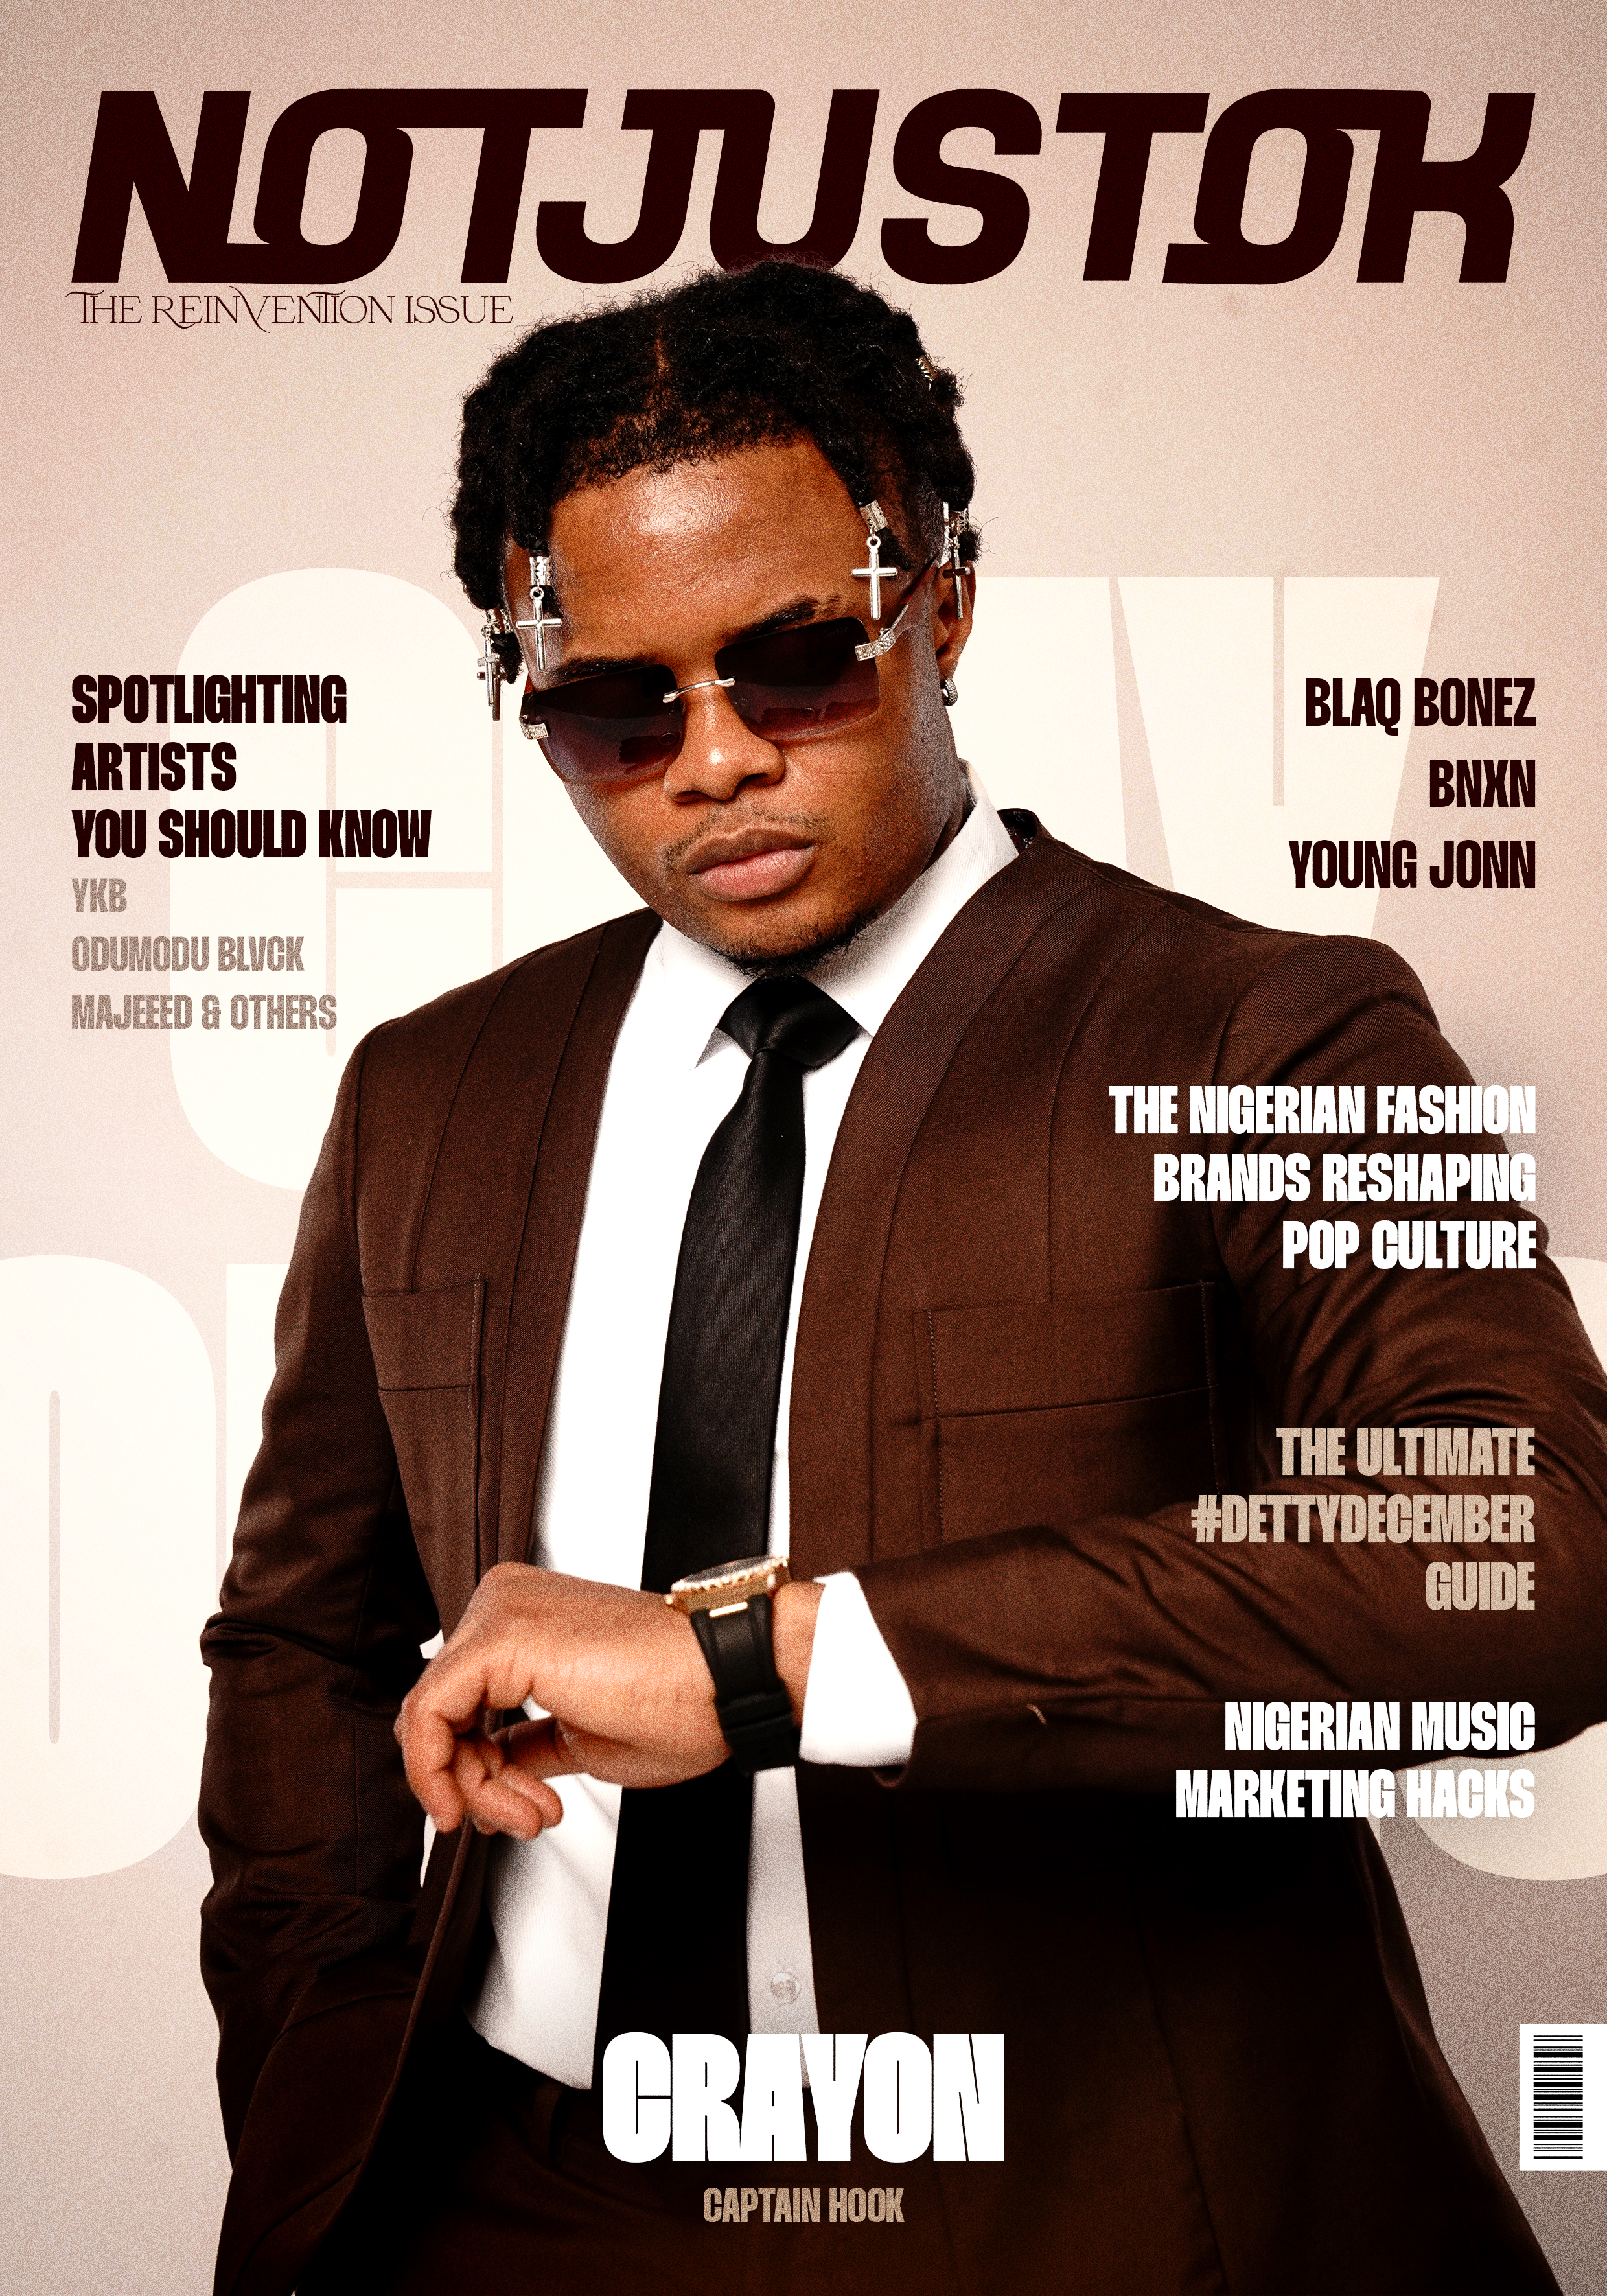 Official Mag Cover featuring Crayon